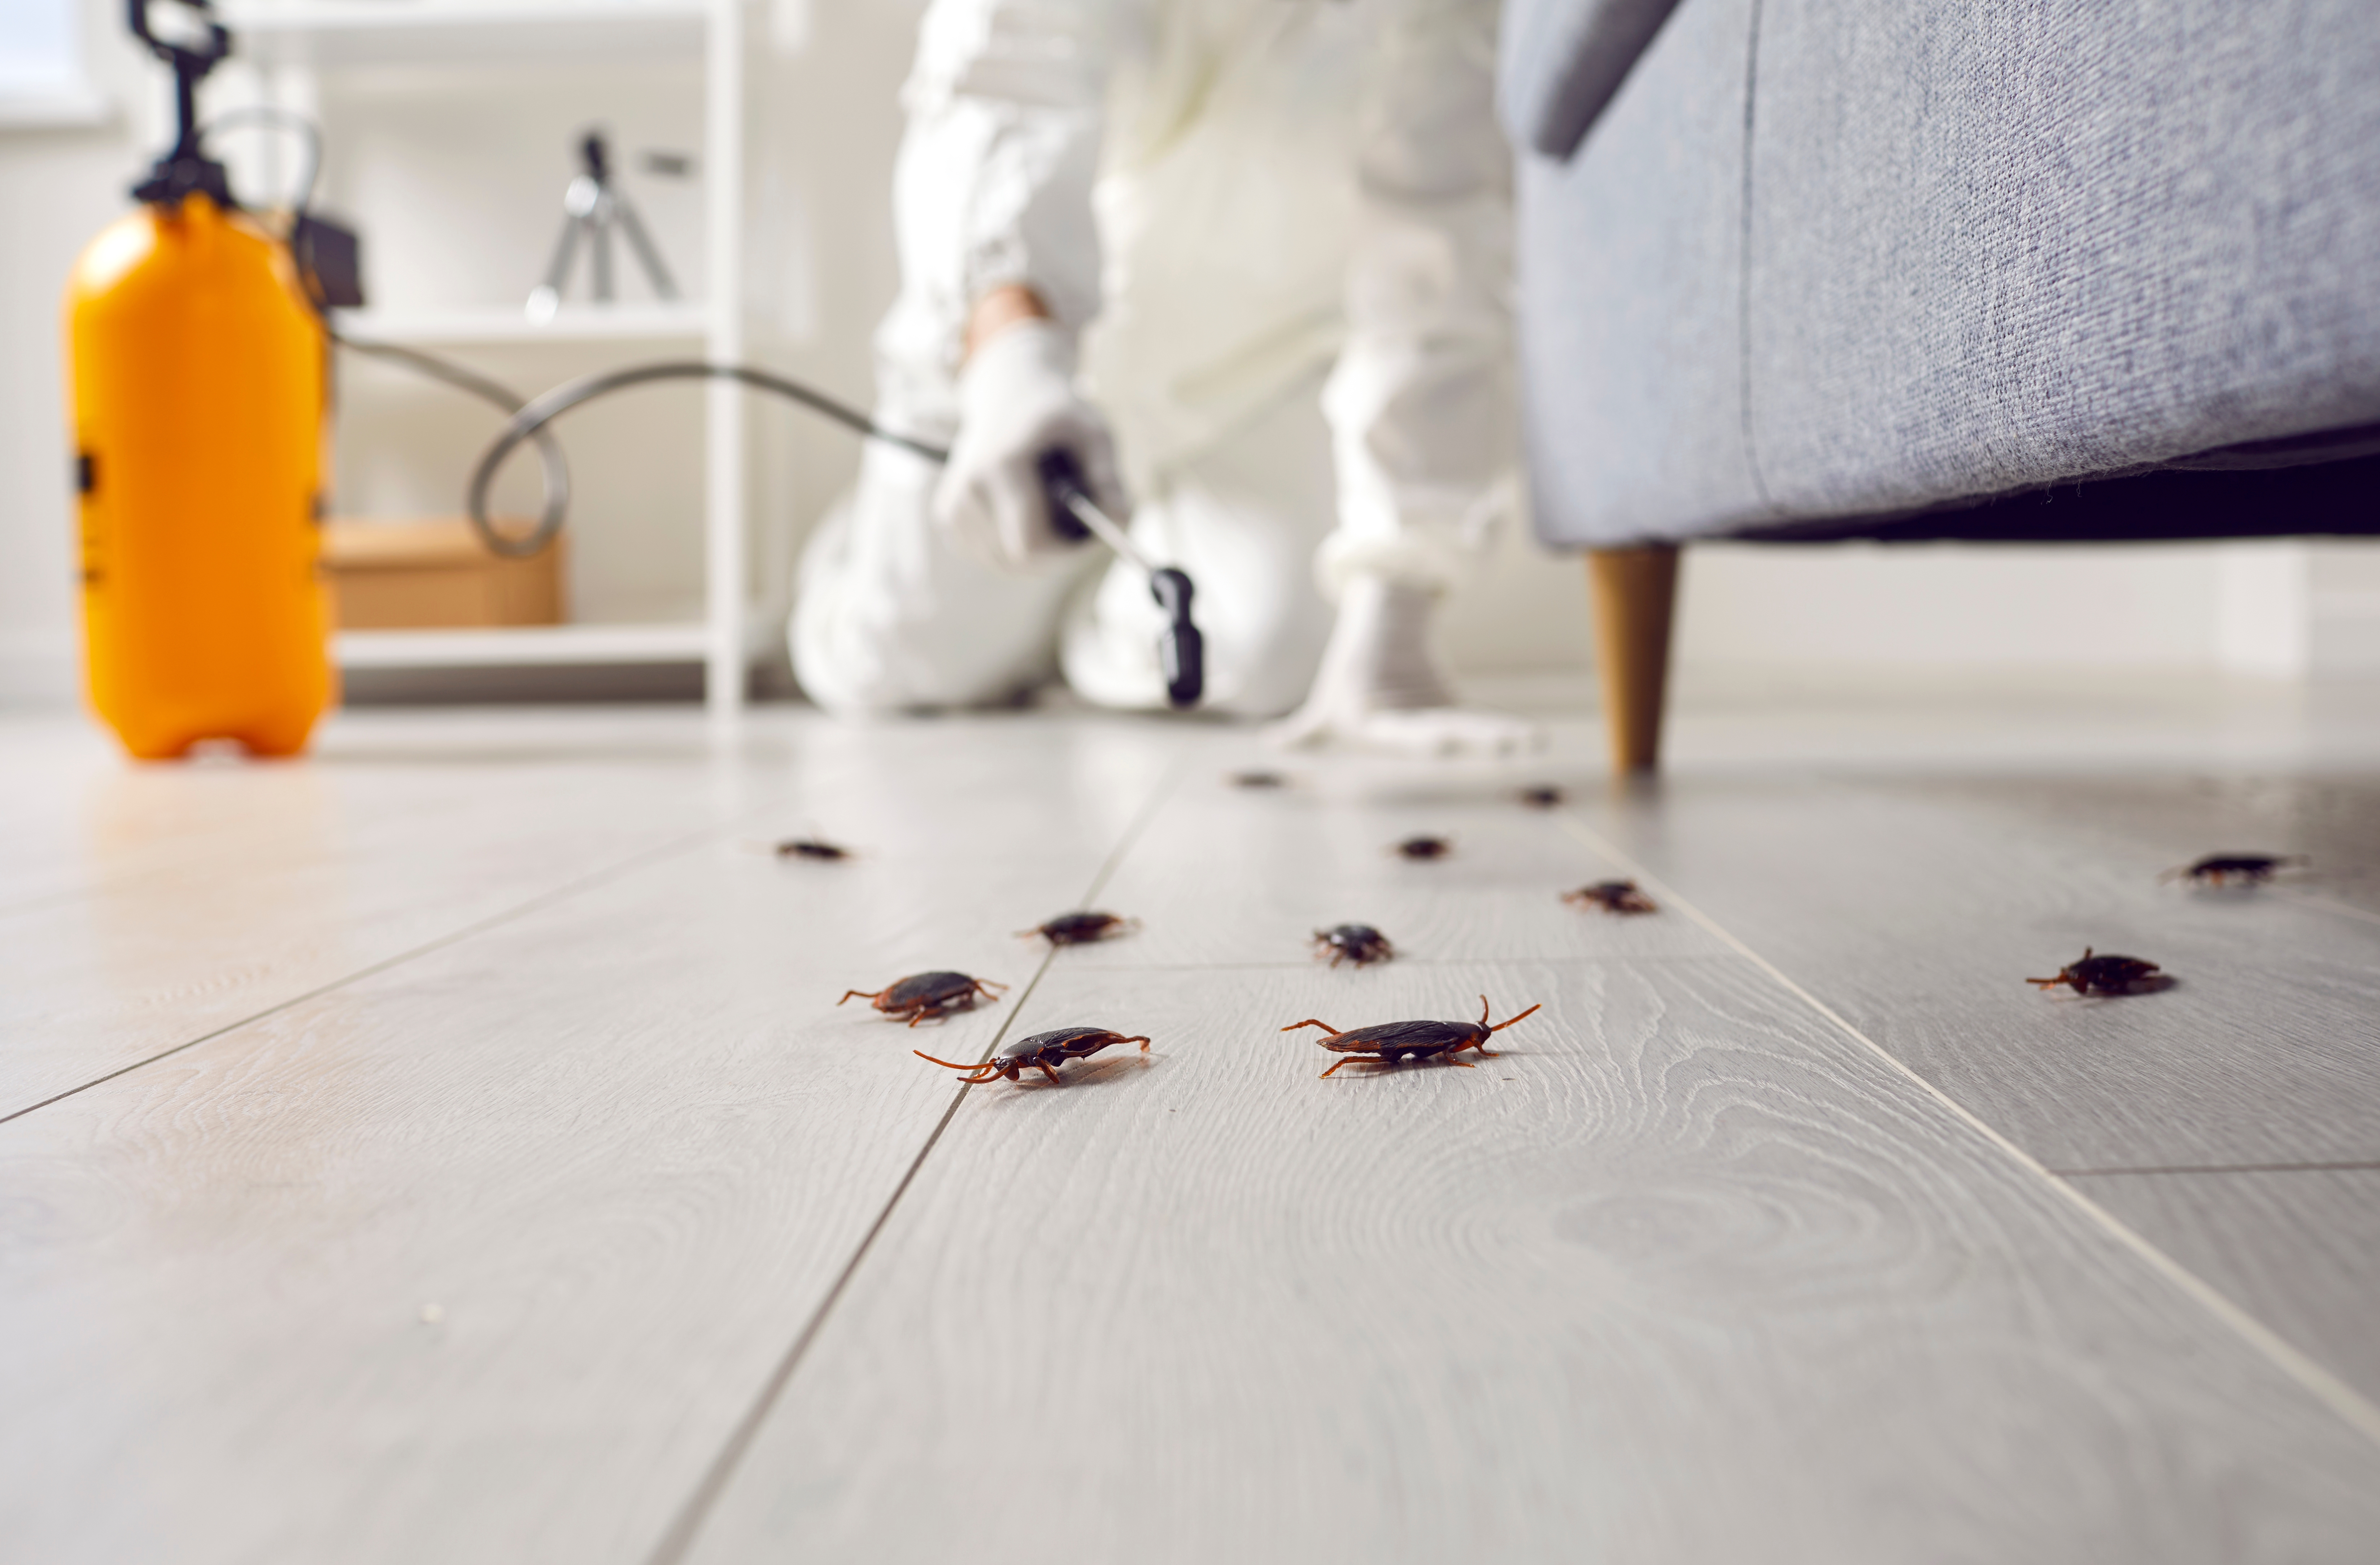 Seek professionals for pest control to ensure the safety and cleanliness of your home.  | Source: Shutterstock